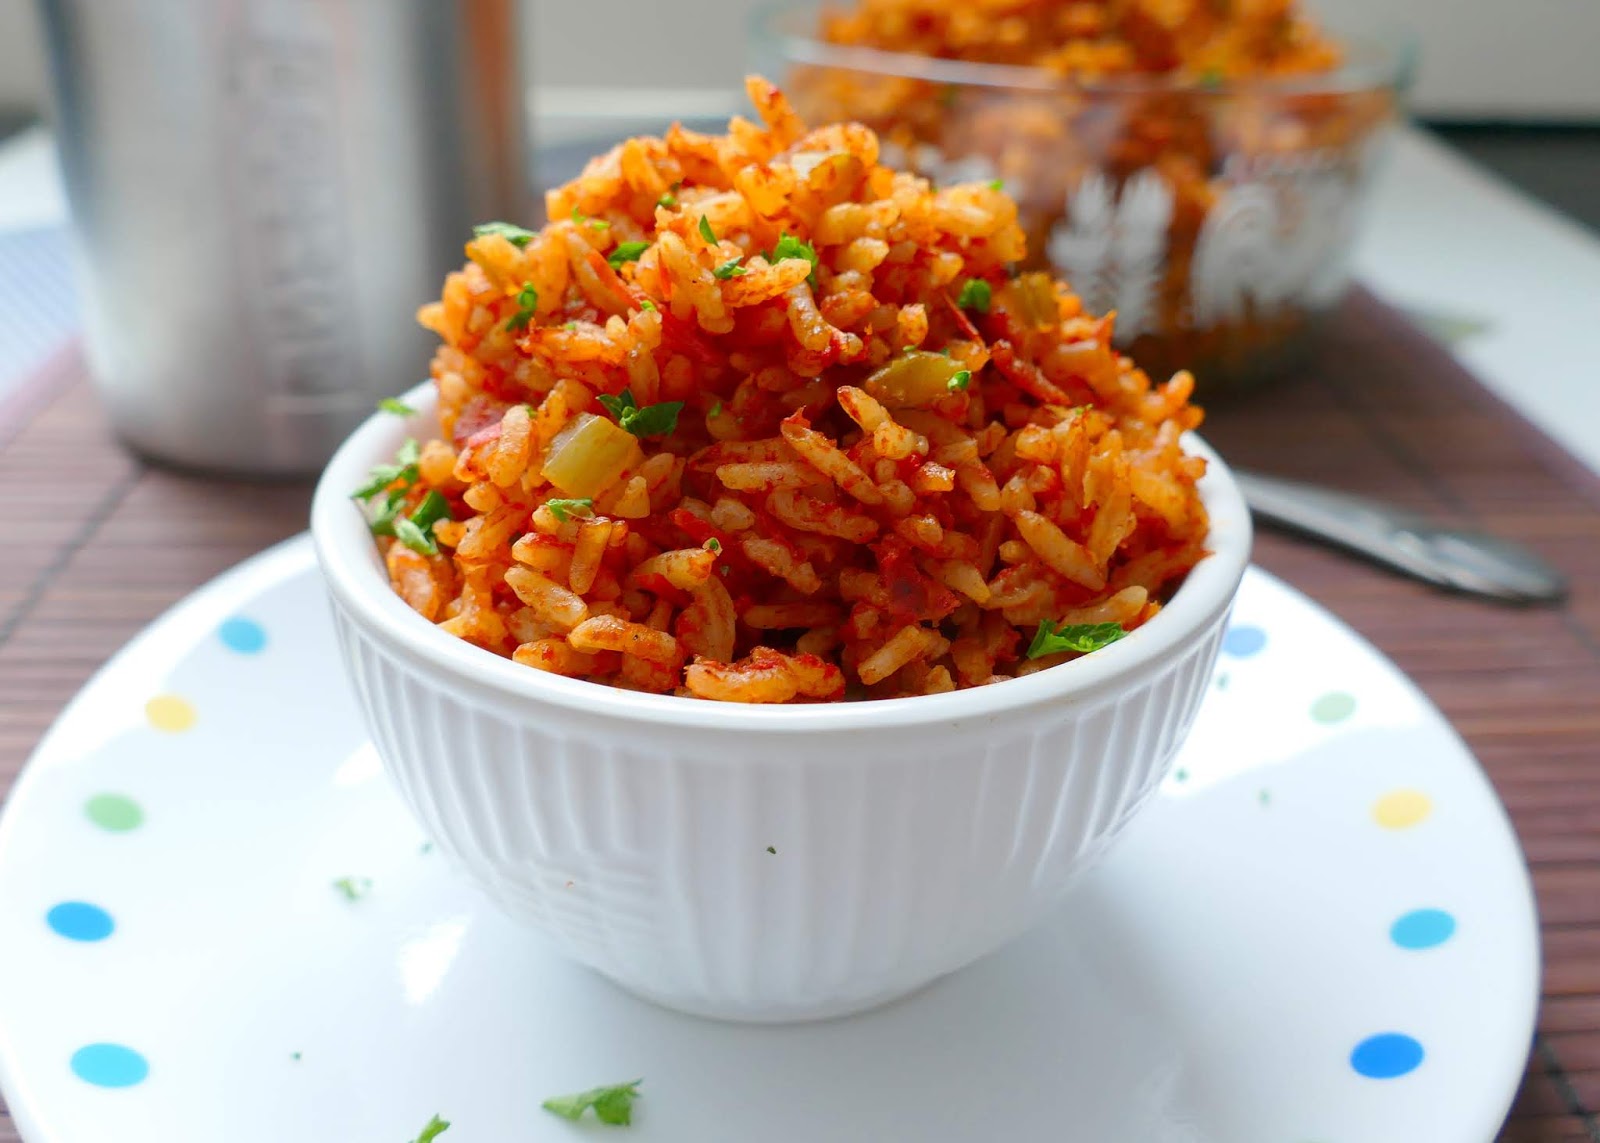 Southern Bacon Red Rice Recipe from Hot Eats and Cool Reads! Everything is better with bacon, especially this traditional southern side dish! Packed with flavor from tomatoes, onion, celery and garlic!